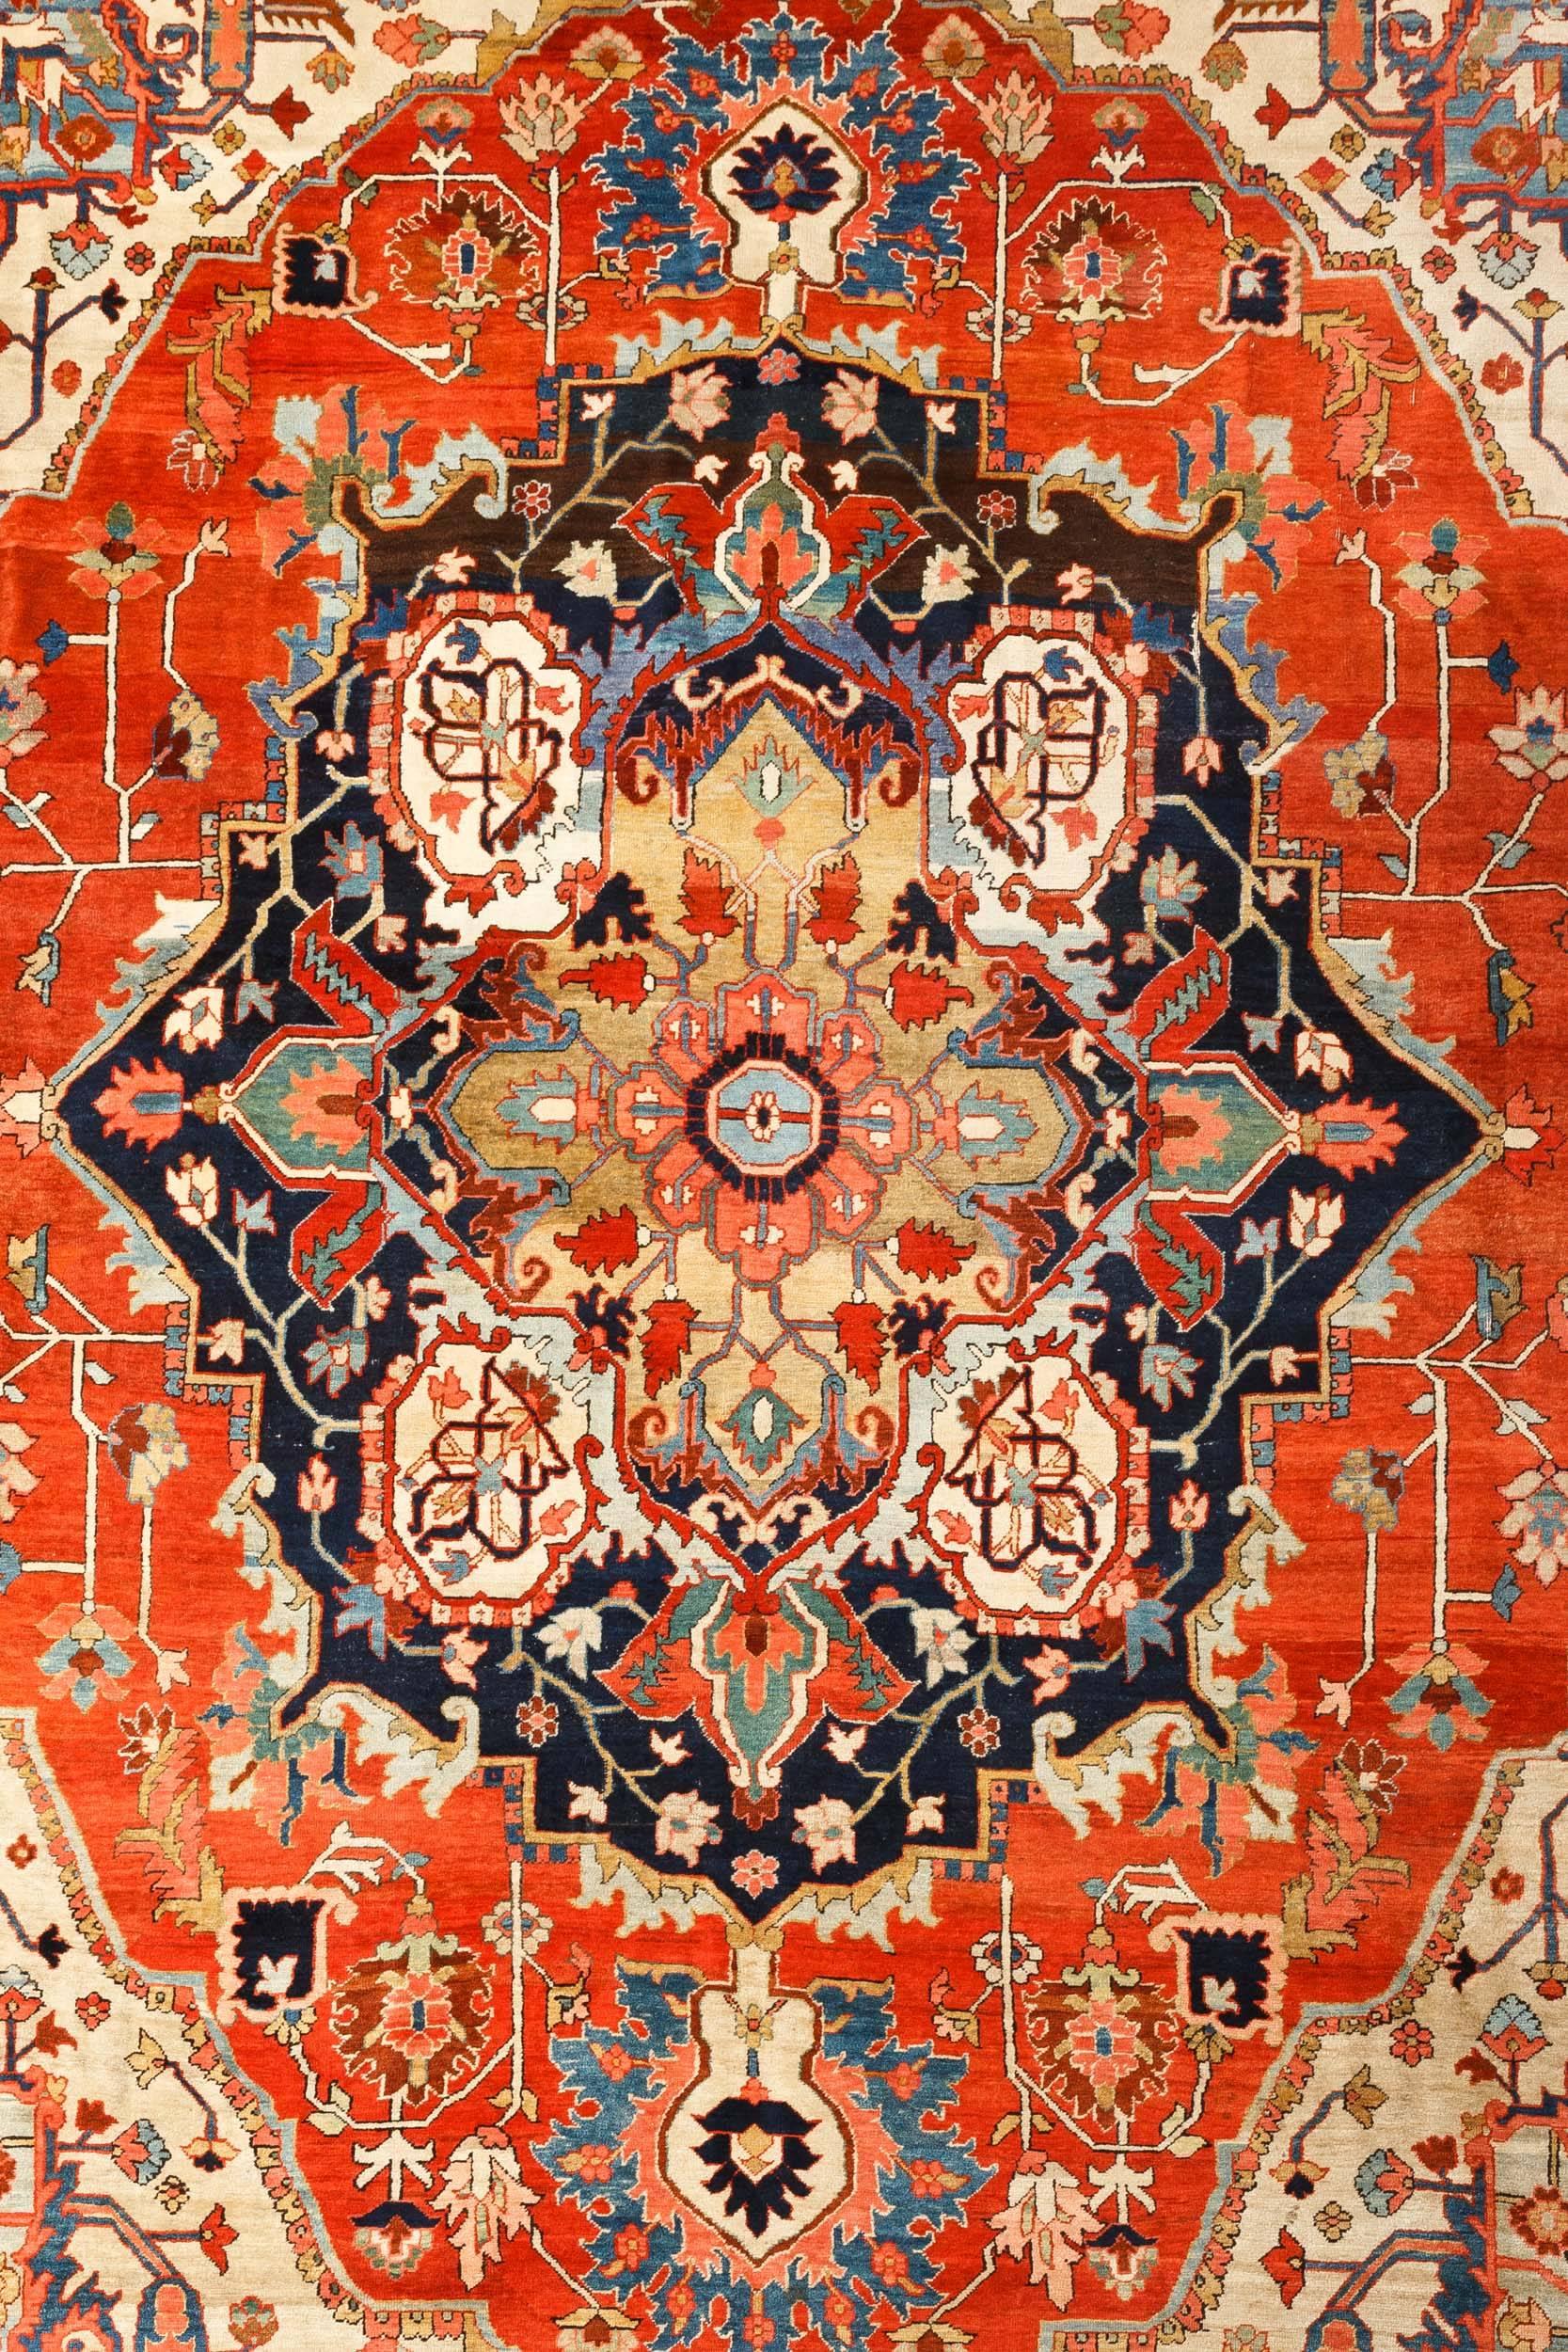 Sublime antique Persian Heriz Serapi rug, over 100 years old with an incredible combination of ornaments. 
This stunning rug is composed of a classical geometric and floral octofoil medallion in the center over a rich Vermillion colored field with